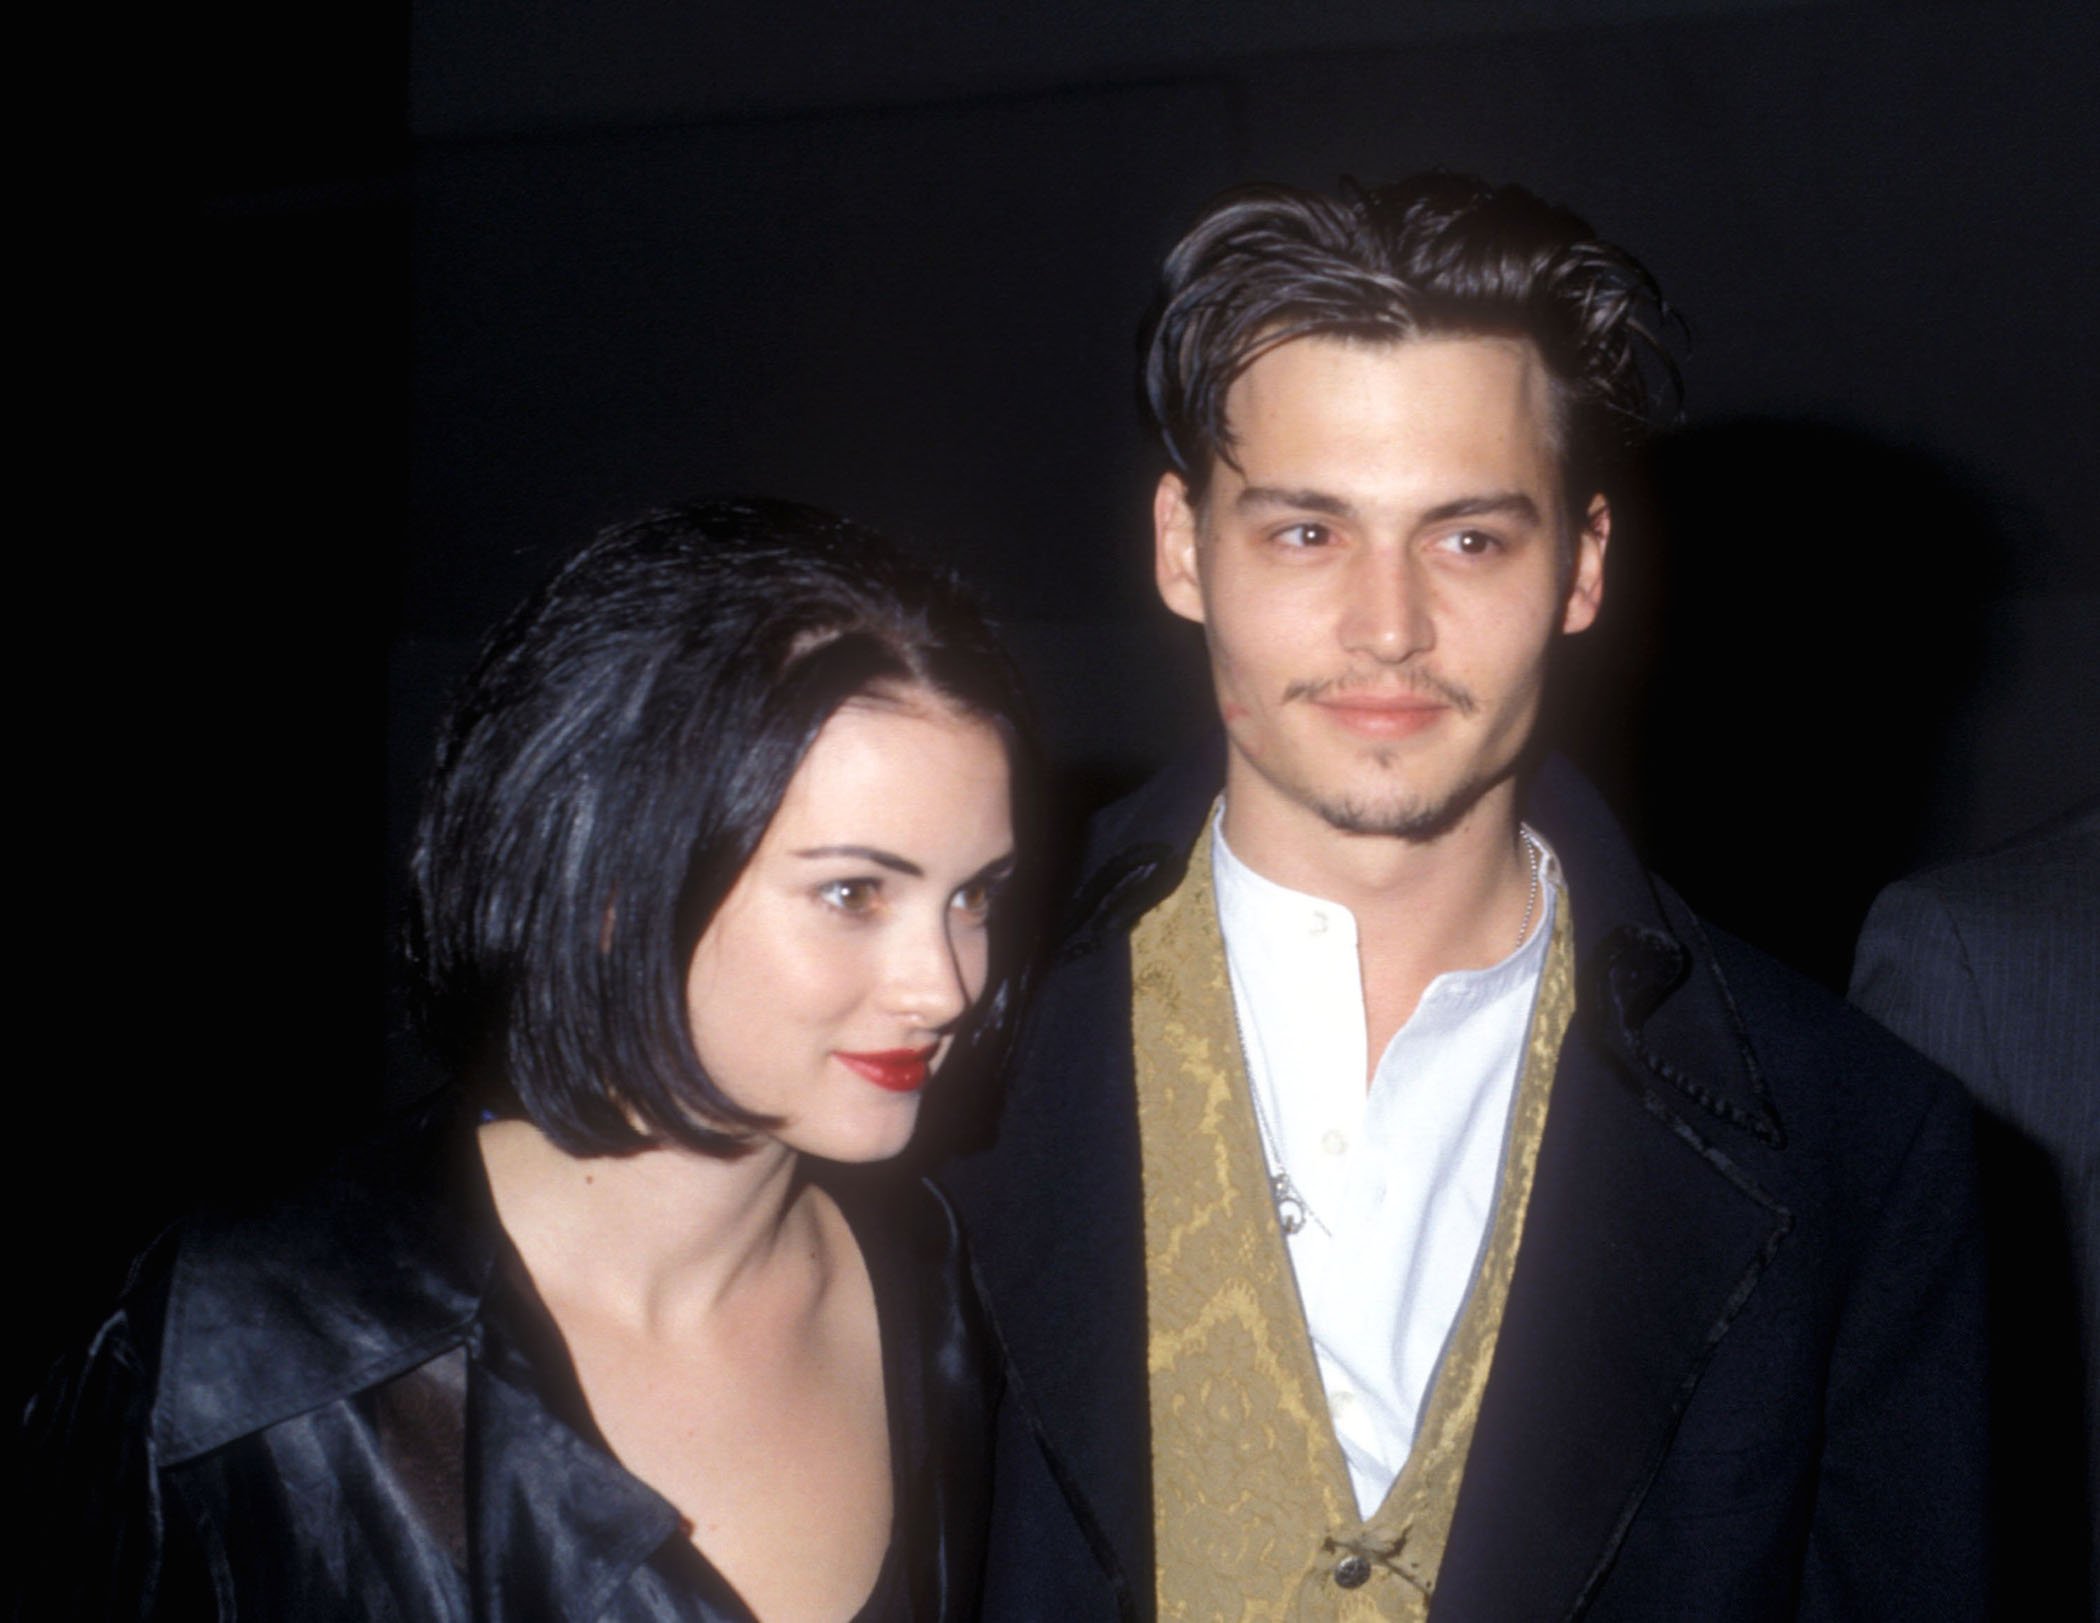 Winona Ryder and Johnny Depp during the 'Edward Scissorhands' Premiere 